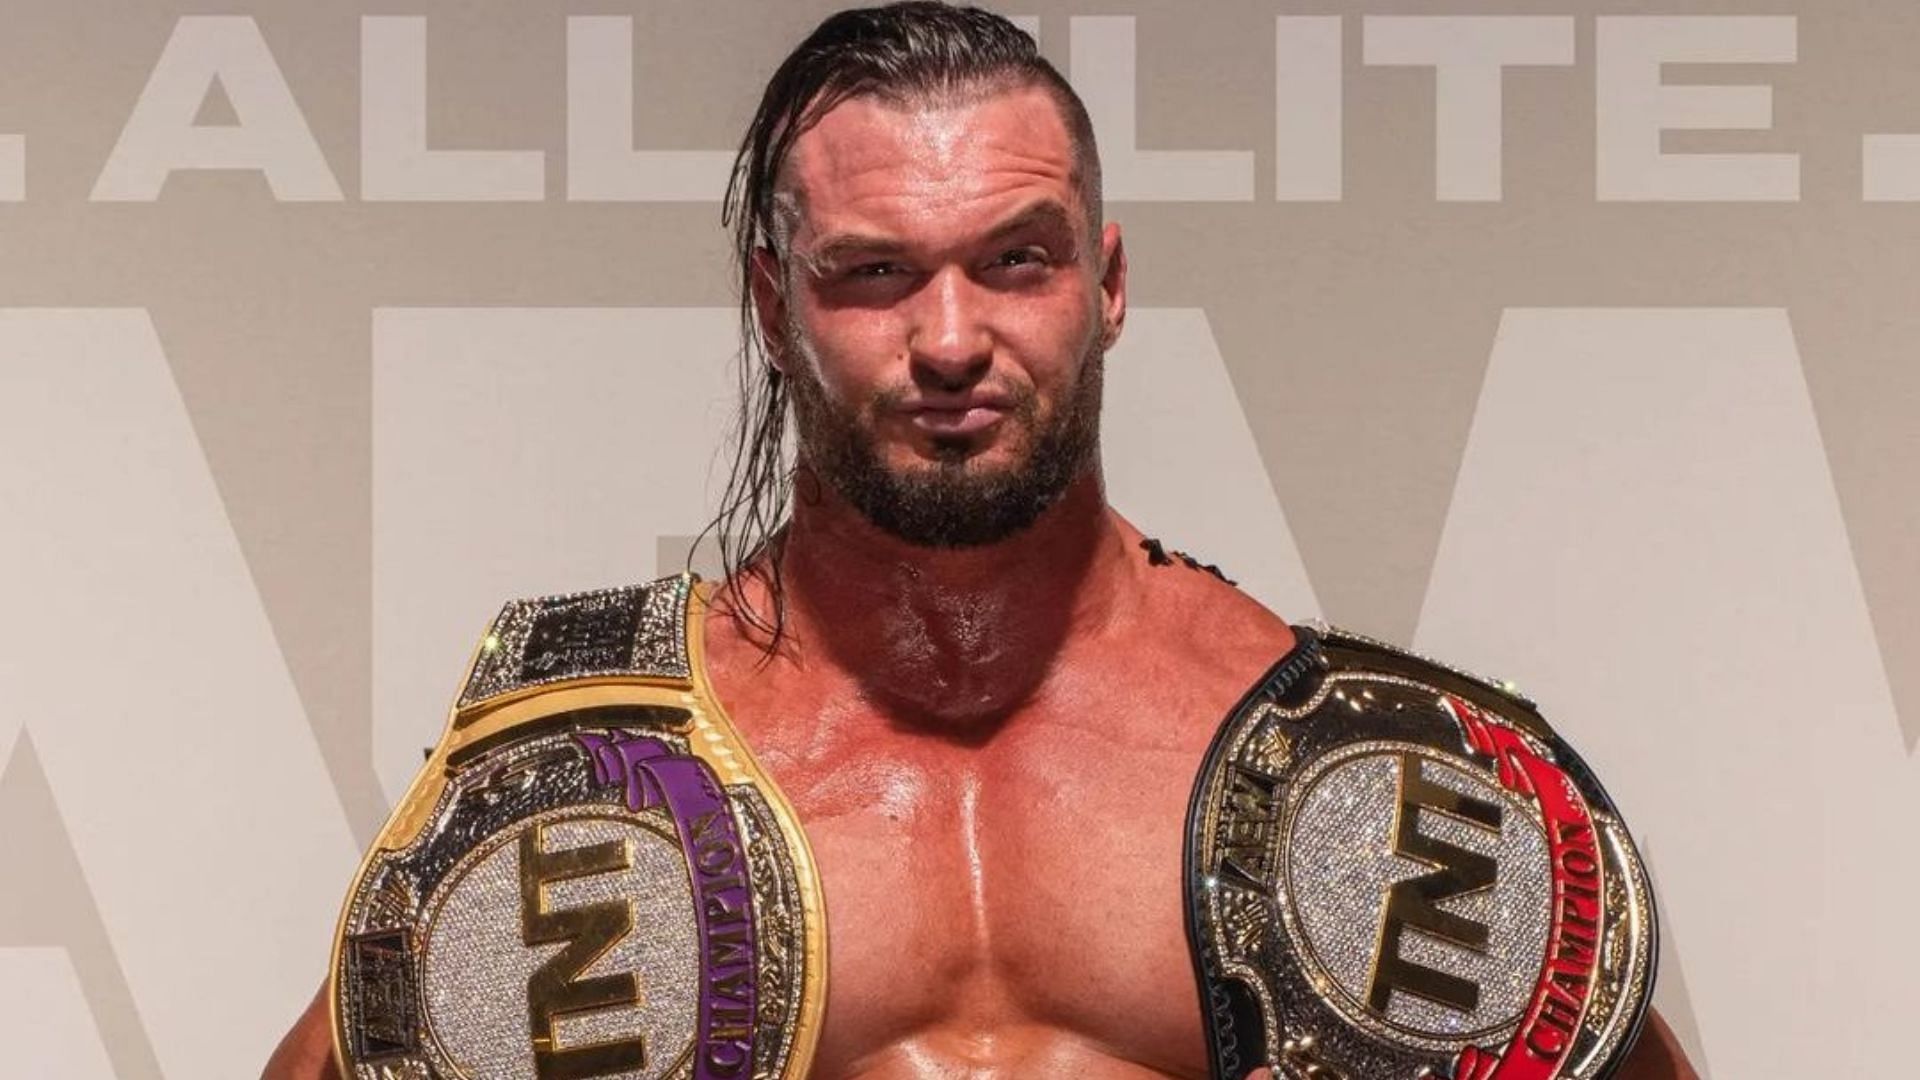 Wardlow is the current AEW TNT Champion